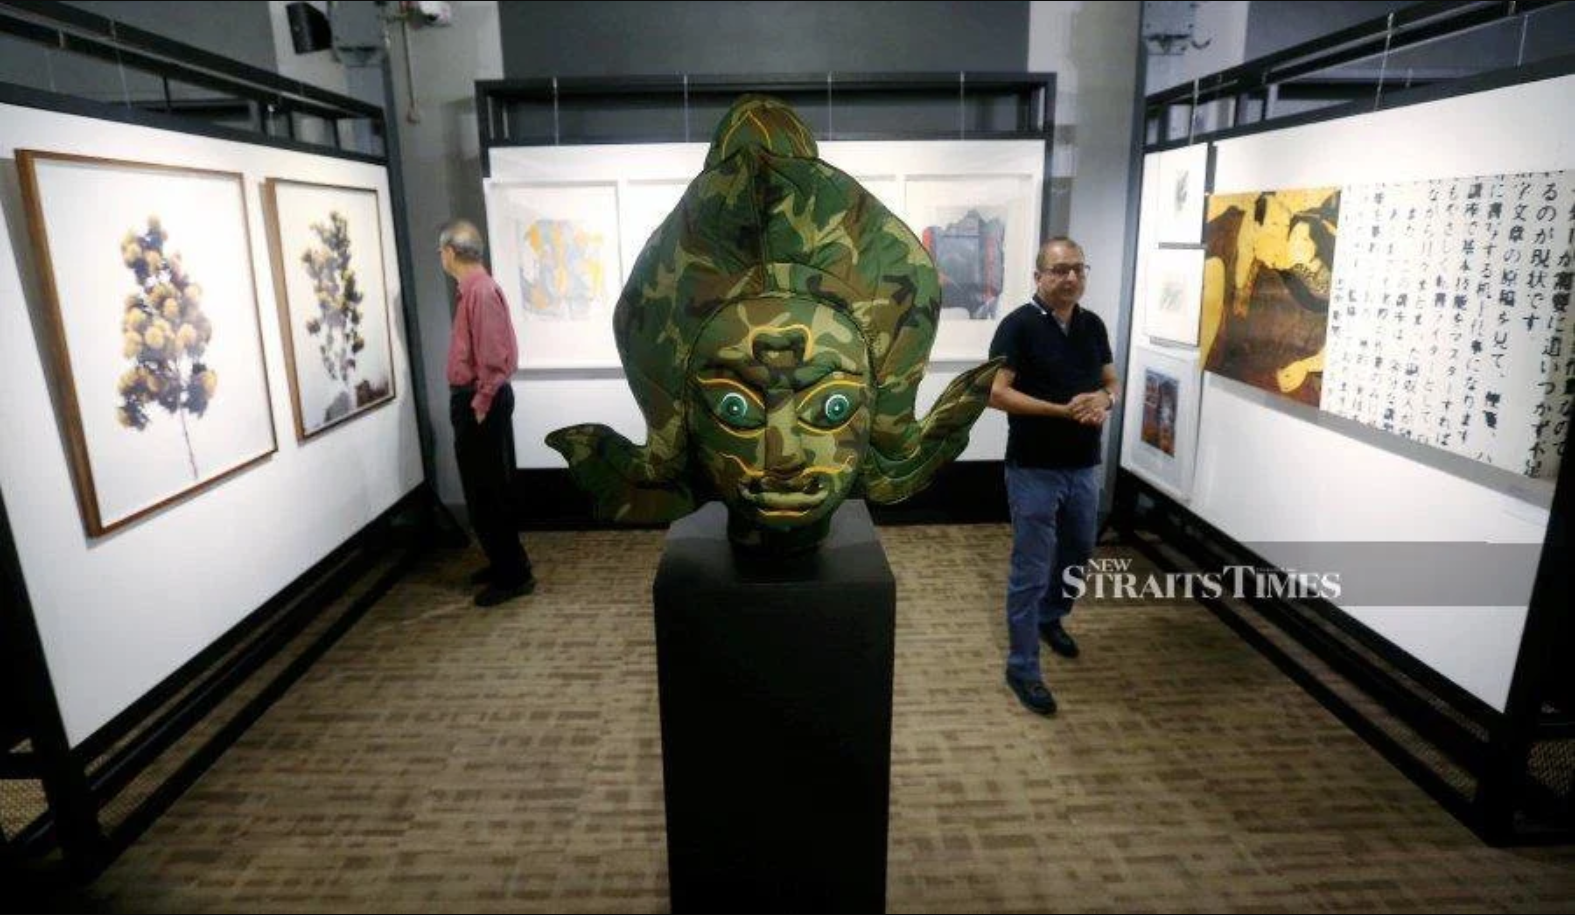 New Straits Times – Henry Butcher Art Auctioneer’s Recent Art Auction Bears Testament To The Nation’s Thriving Art Market